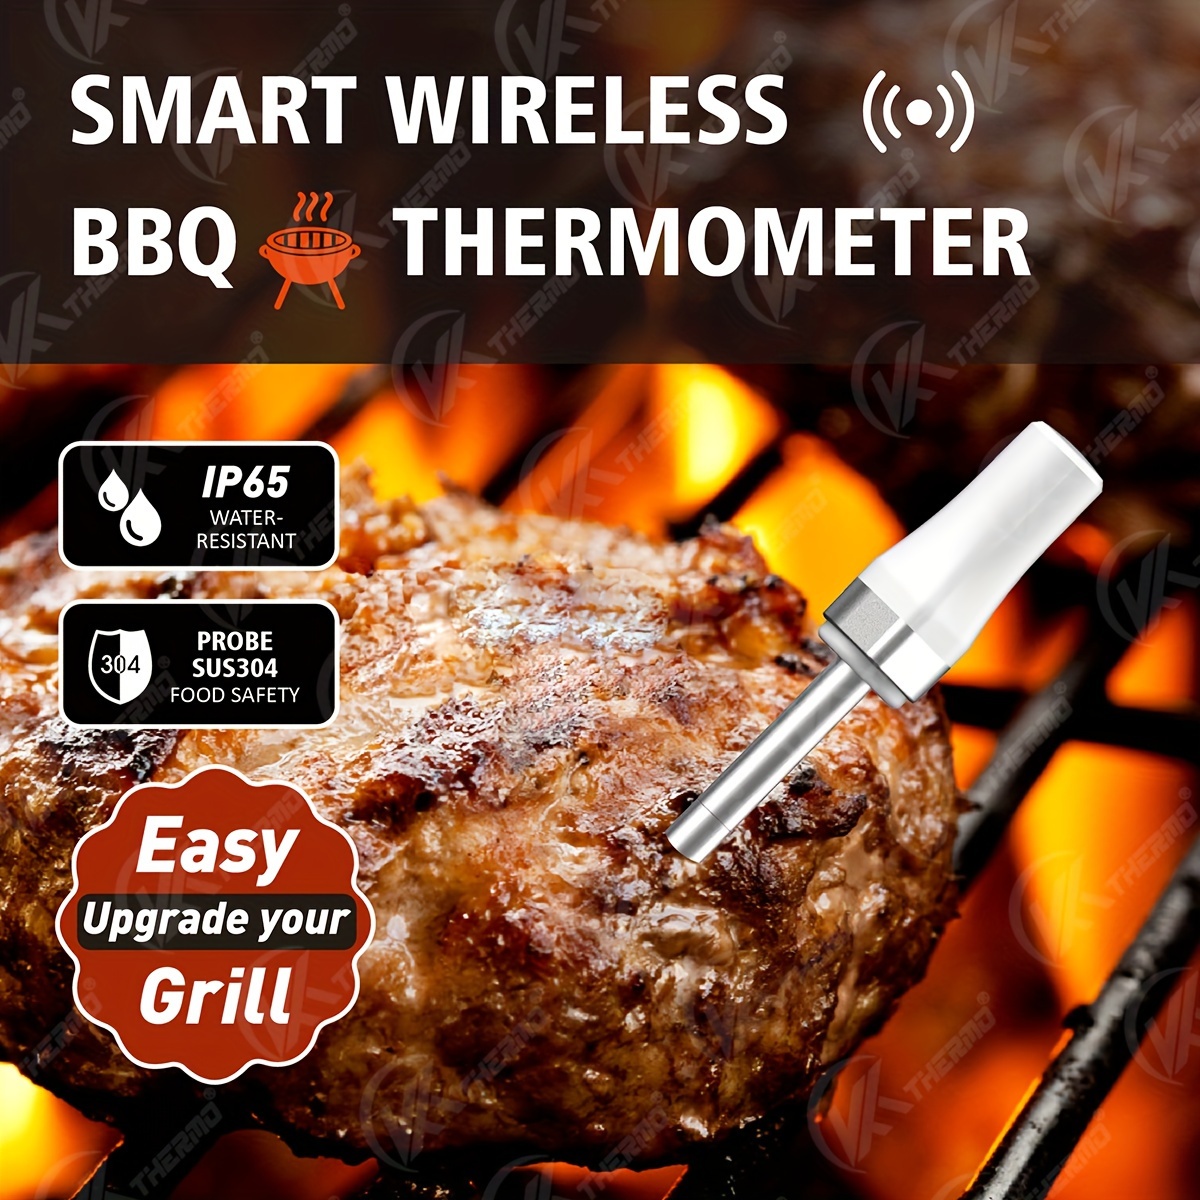 Wireless Meat Thermometer Digital Remote Food Cooking Meat